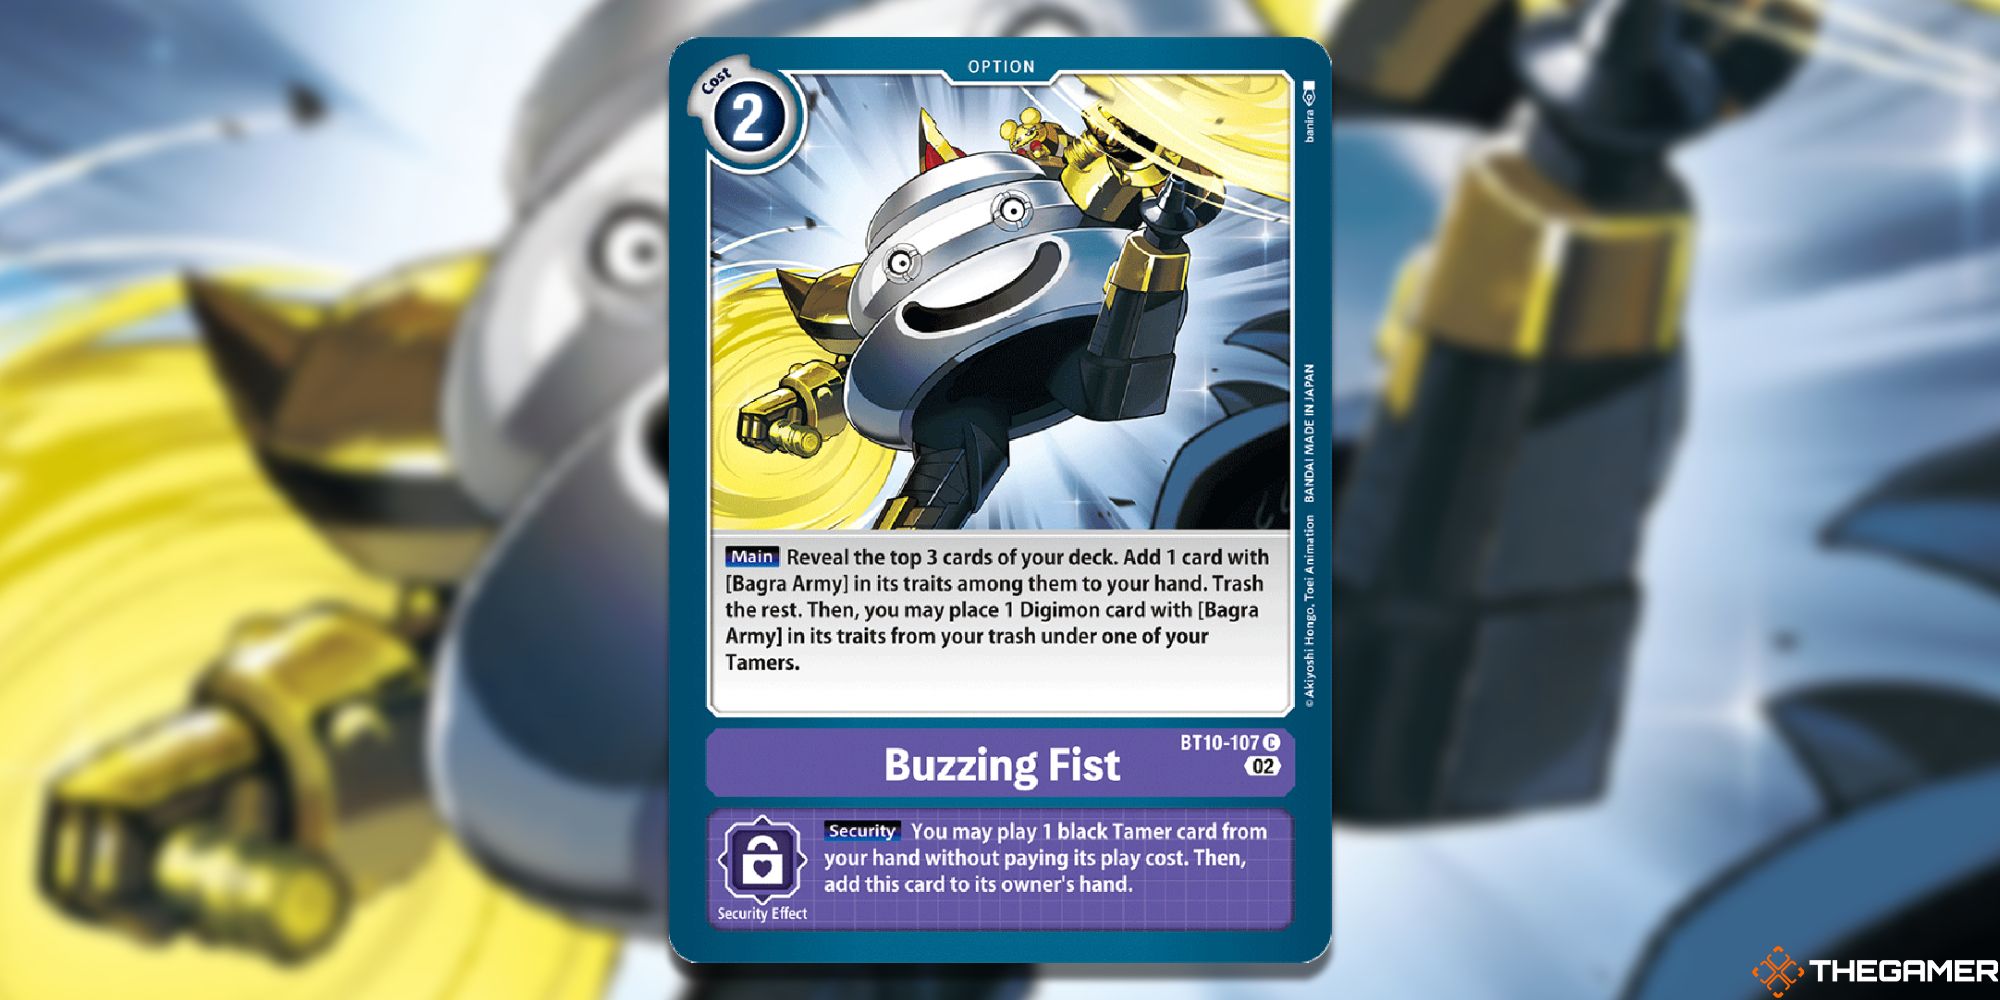 buzzing fist image with blur from digimon card game